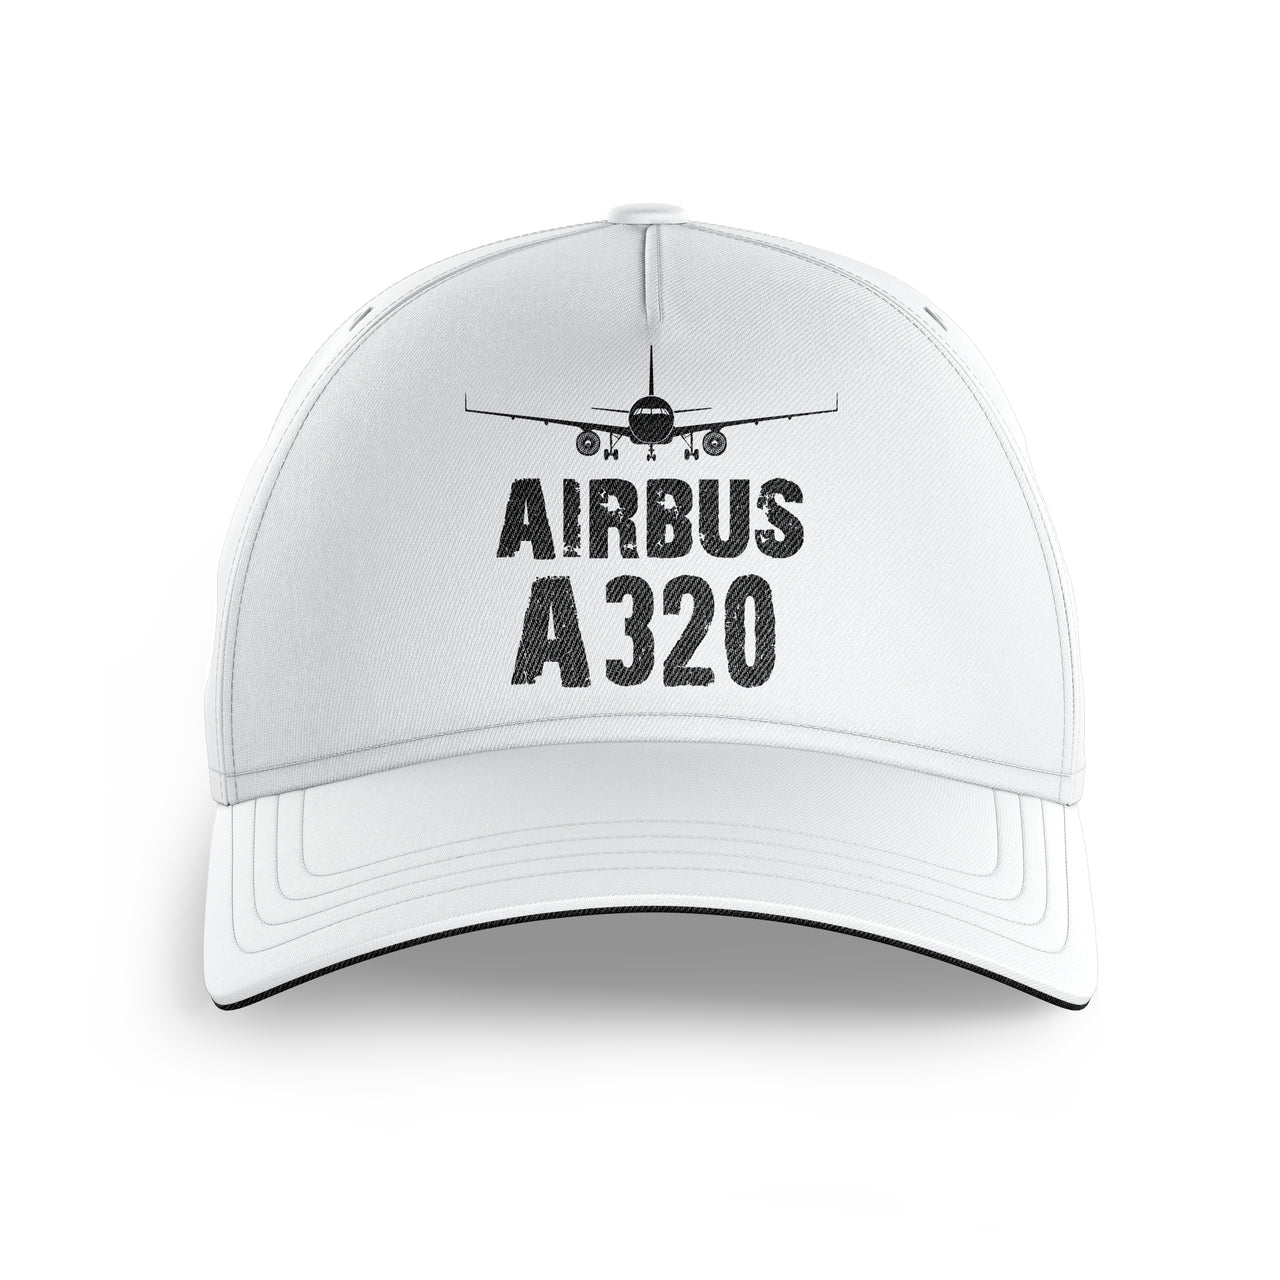 Airbus A320 & Plane Printed Hats